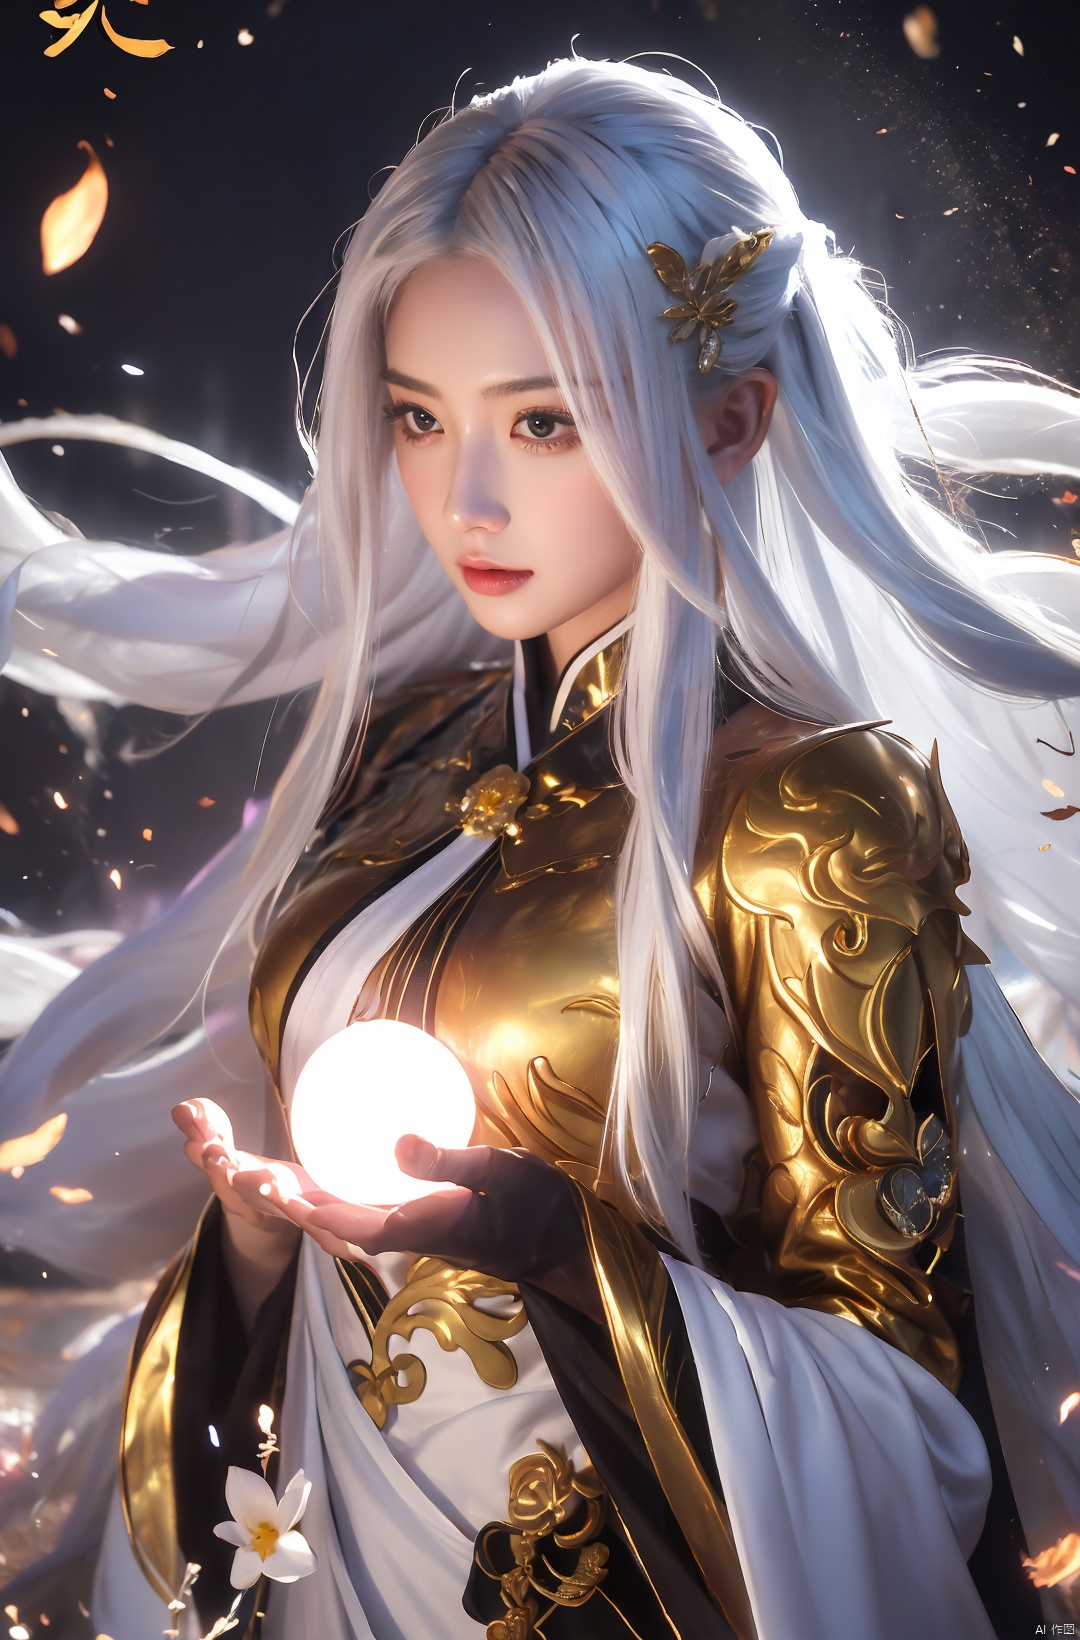  a woman with white hair holding a glowing ball in her hands, white haired deity, by Yang J, heise jinyao, inspired by Zhang Han, xianxia fantasy, flowing gold robes, inspired by Guan Daosheng, human and dragon fusion, cai xukun, inspired by Zhao Yuan, with long white hair, fantasy art style,,Ink scattering_Chinese style, smwuxia Chinese text blood weapon:sw, lotus leaf, (\shen ming shao nv\), gold armor, a boy_gmlwman, wunv, Nine tails, a dragon, lbb, jyy-hd